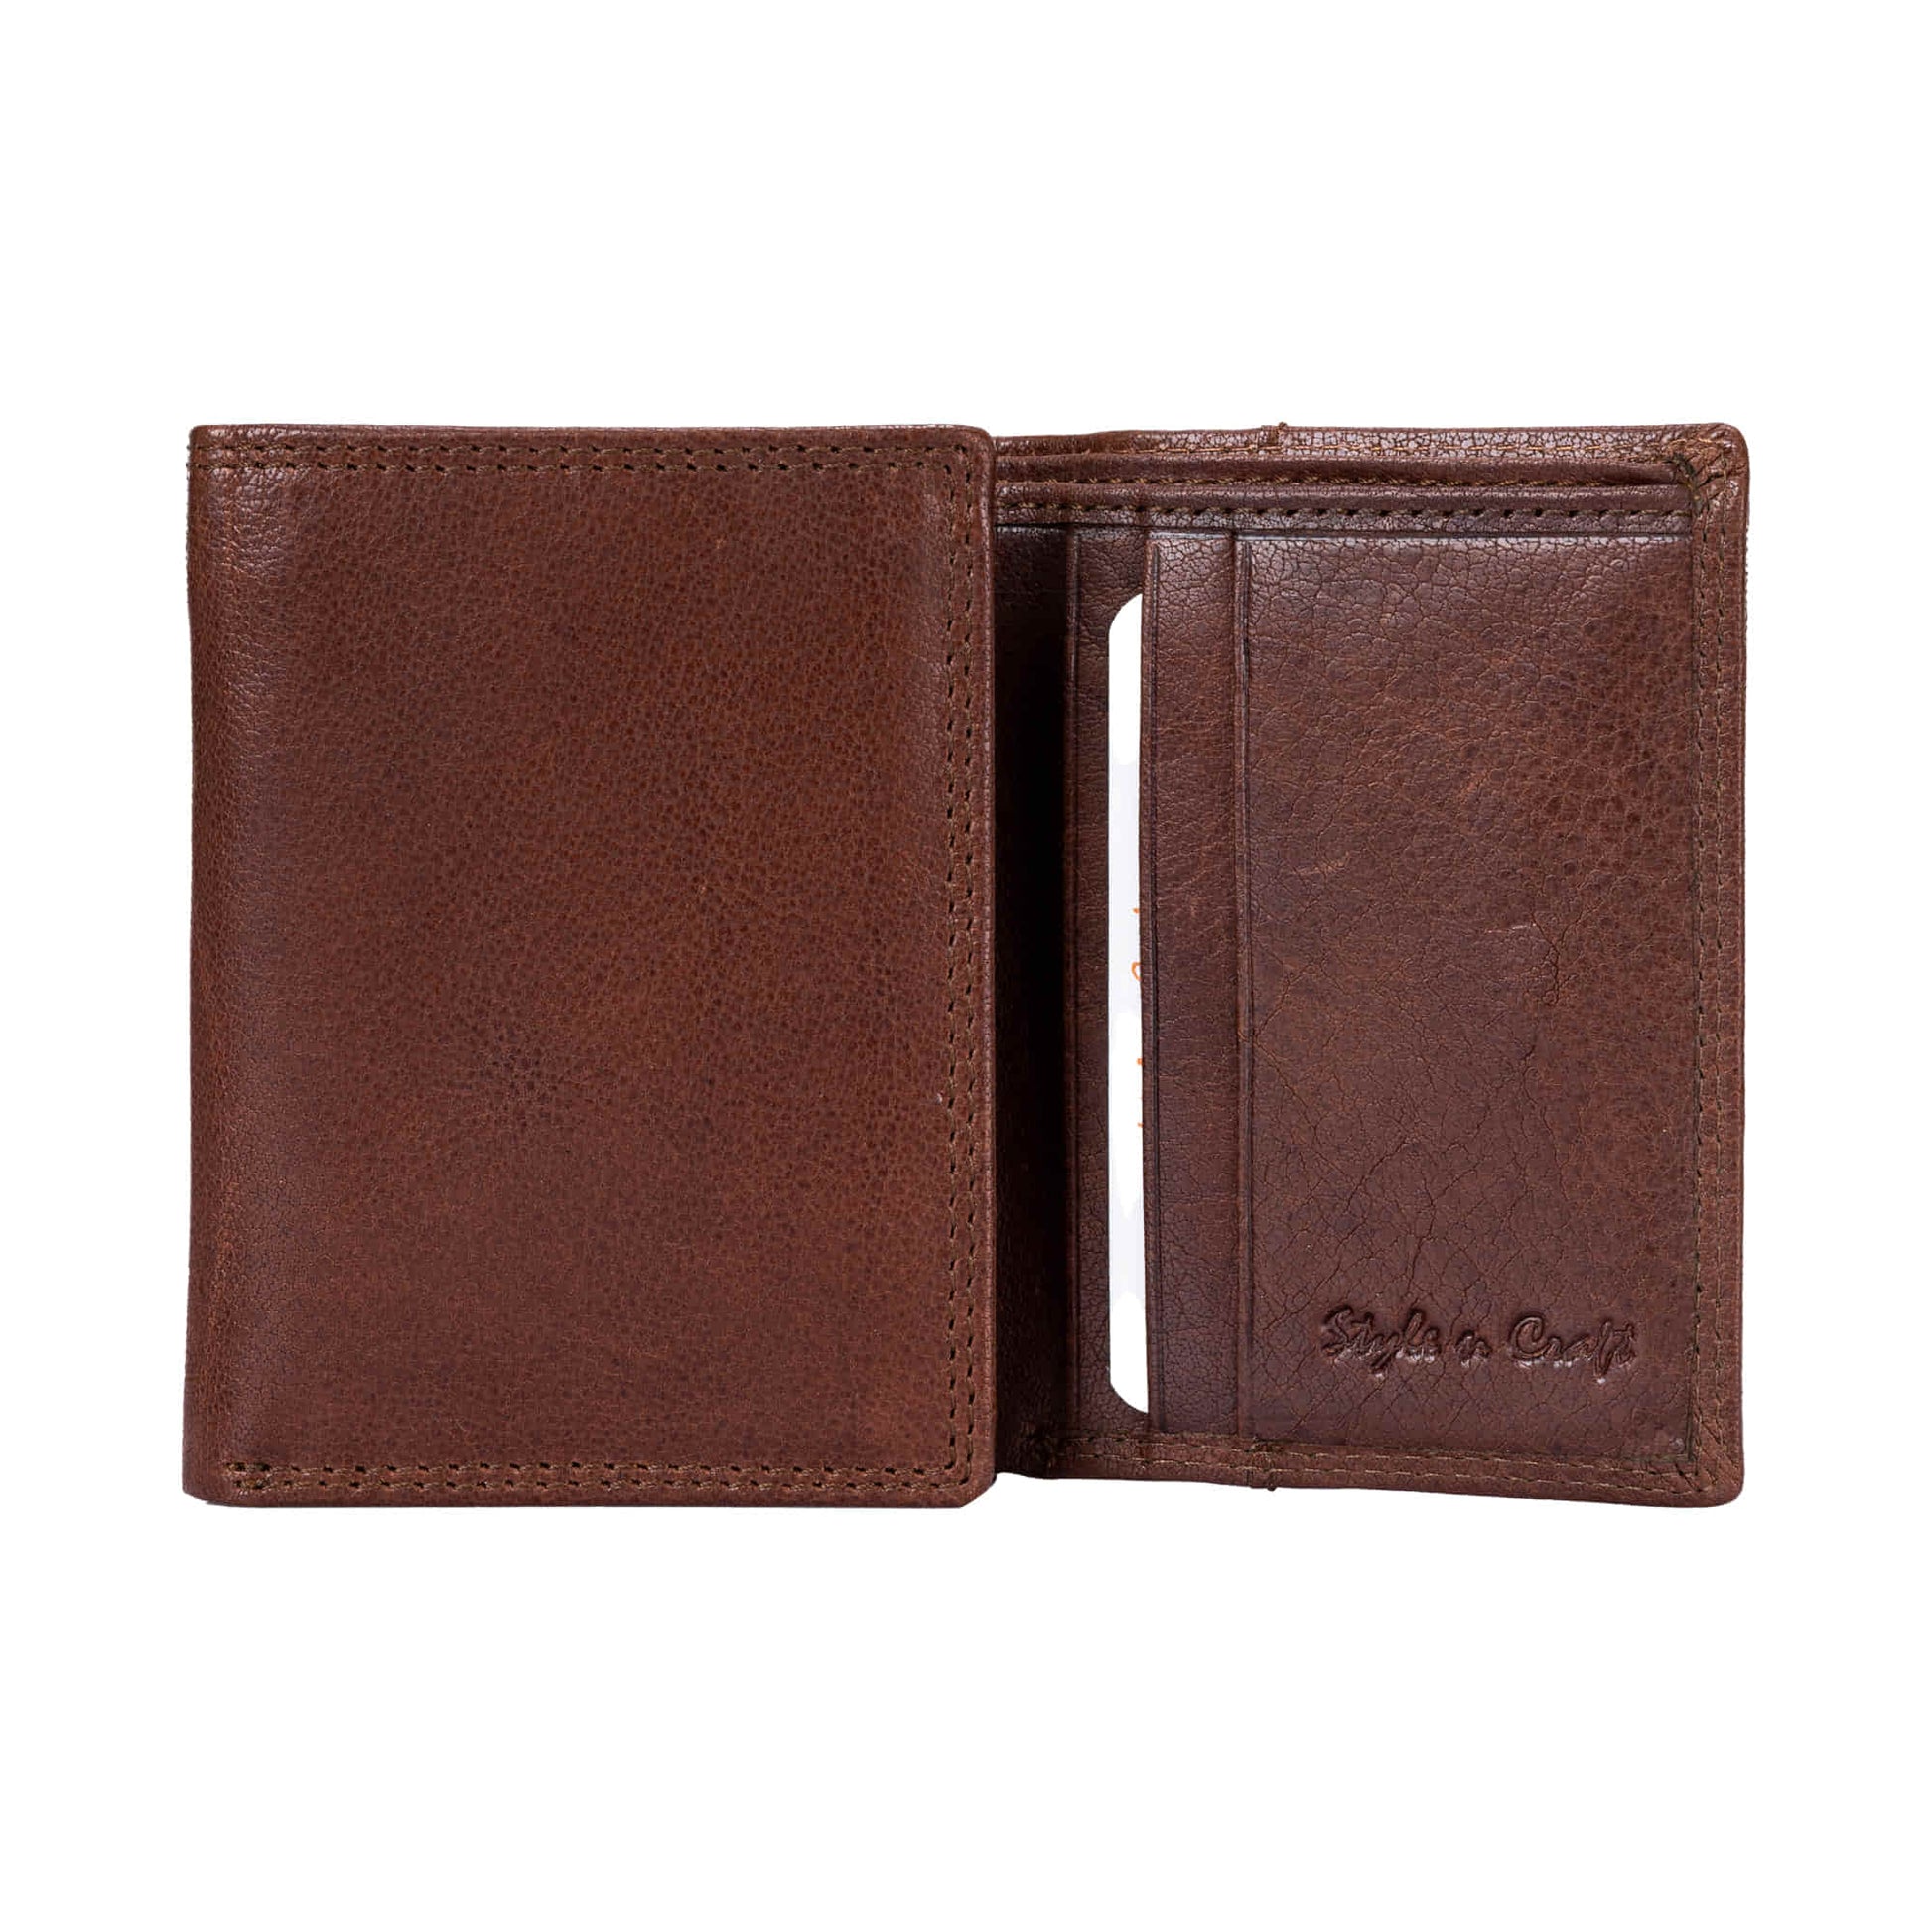 Style n Craft 301791 Trifold Wallet in Vintage Full Grain Leather - brown color - 1 fold open view of the trifold wallet showing the credit card pockets & the logo